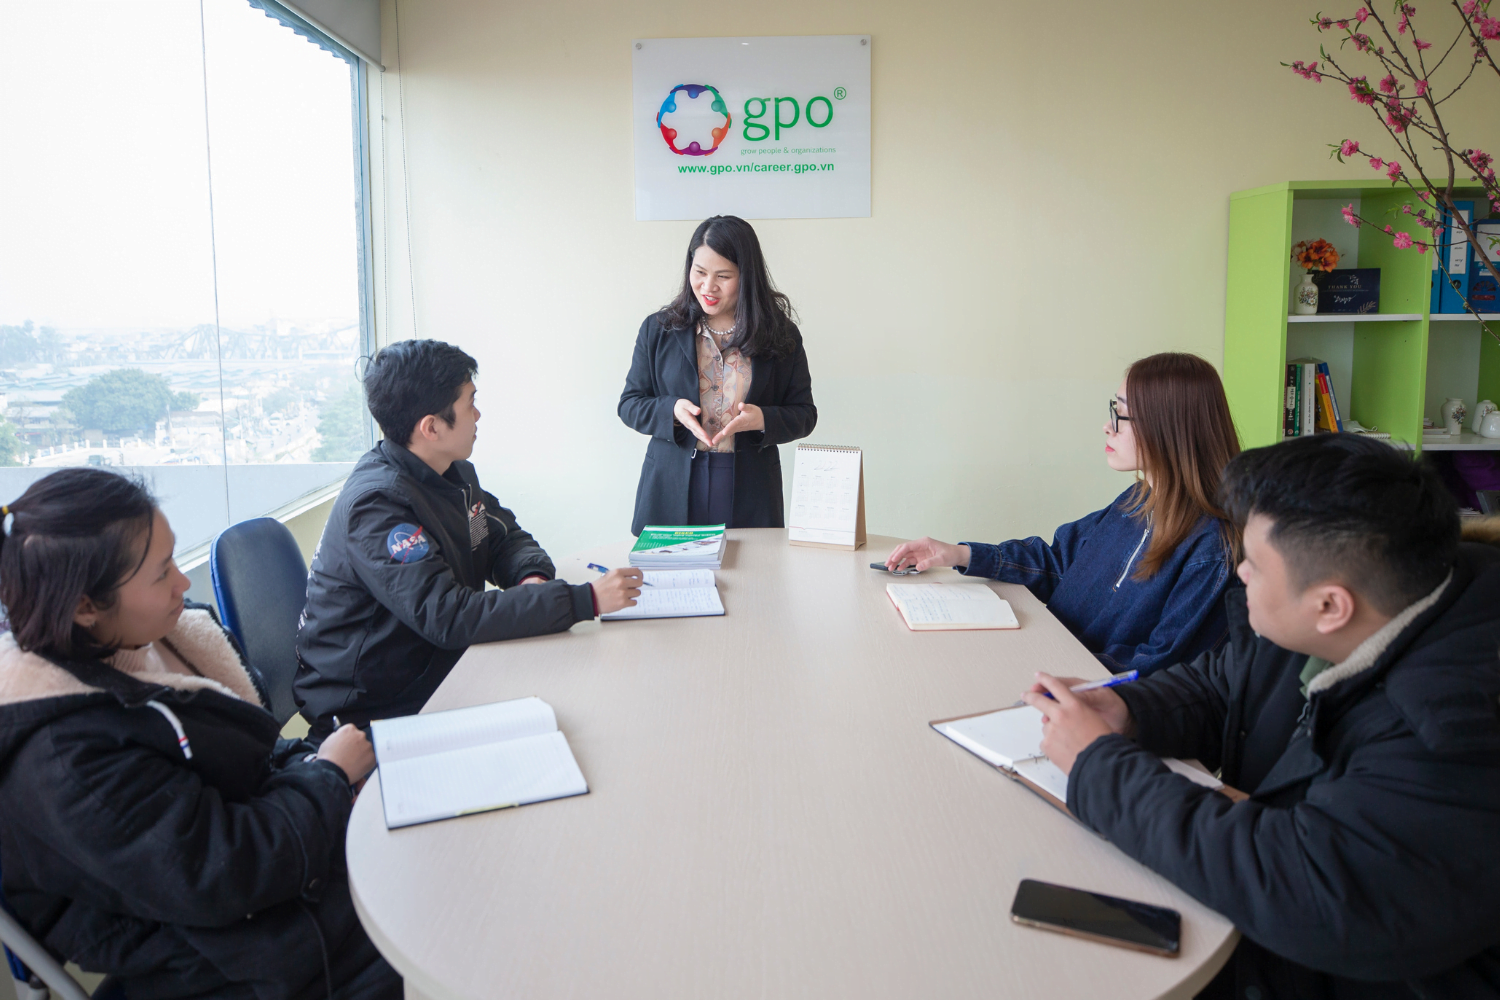 Yen Do leading a meeting at her company in Vietnam